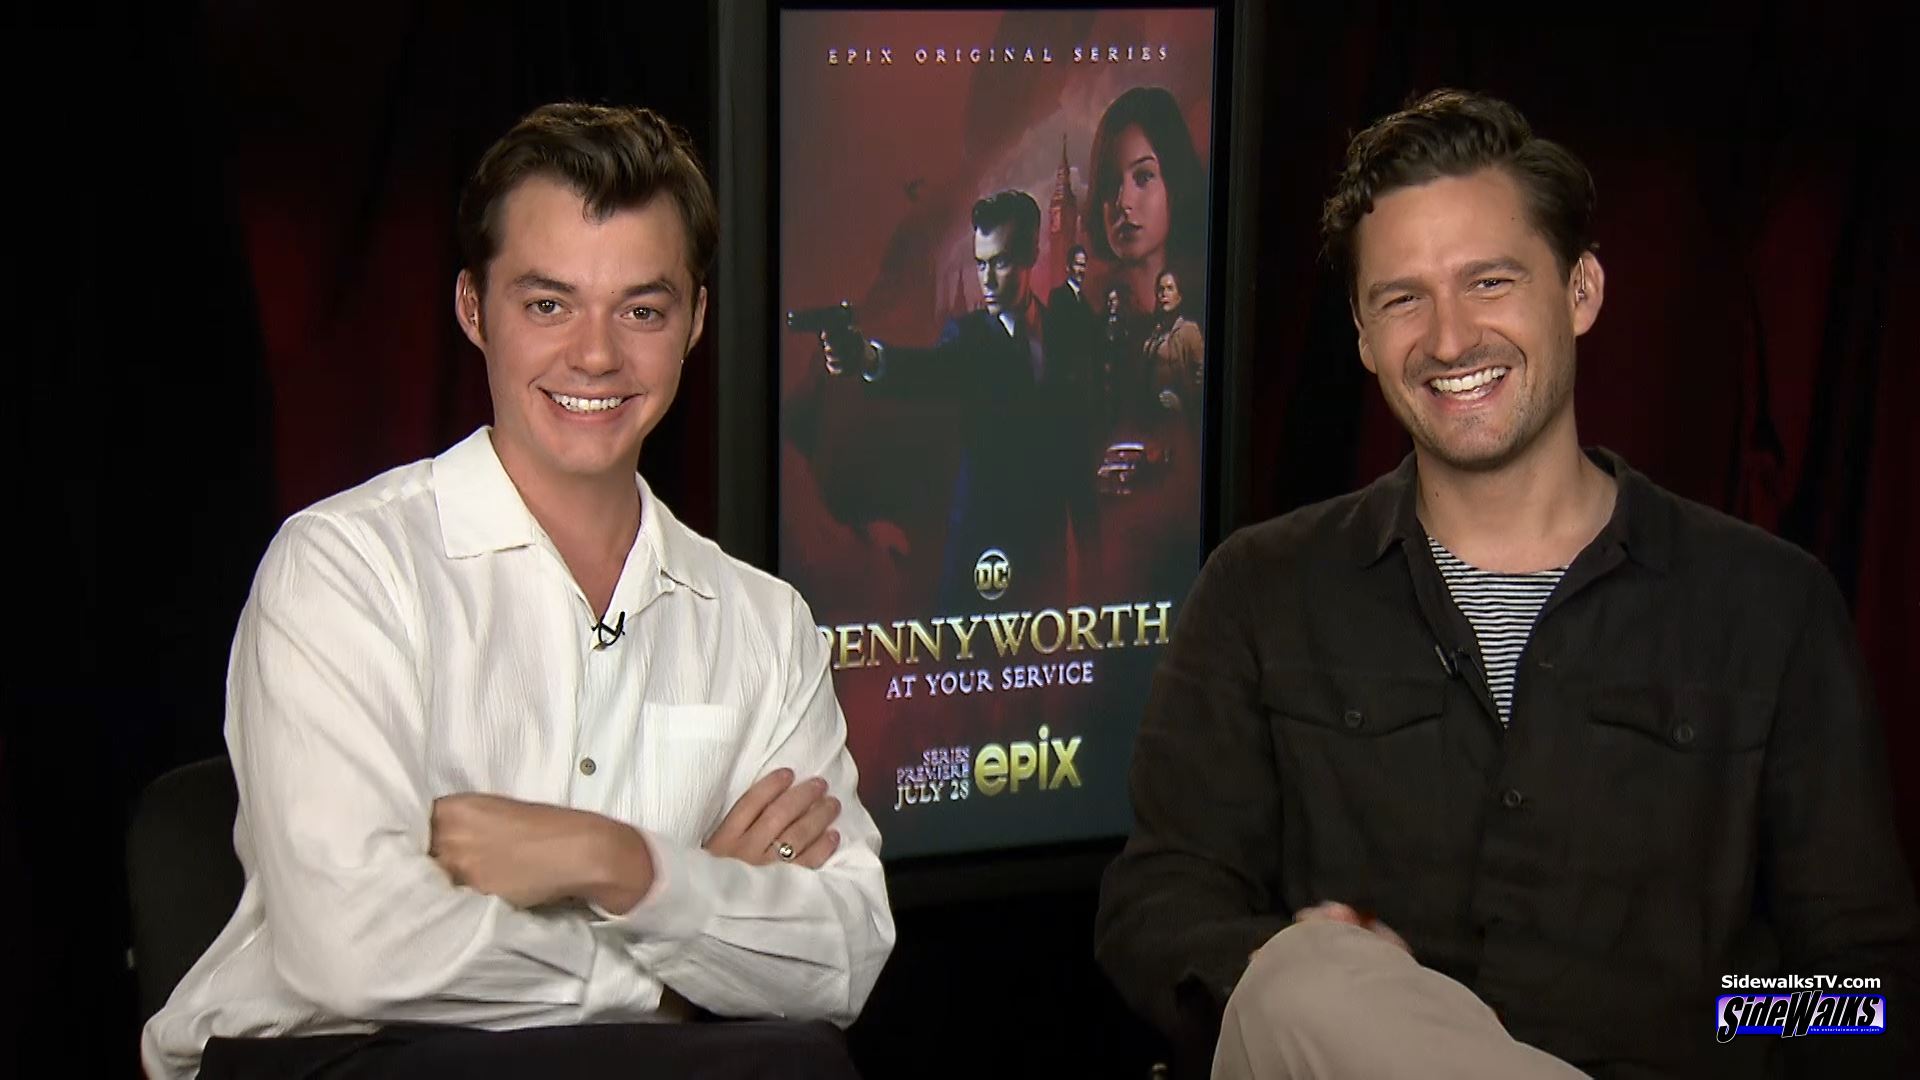 The "Pennyworth" actors in a screen shot of "Sidewalks'" interview